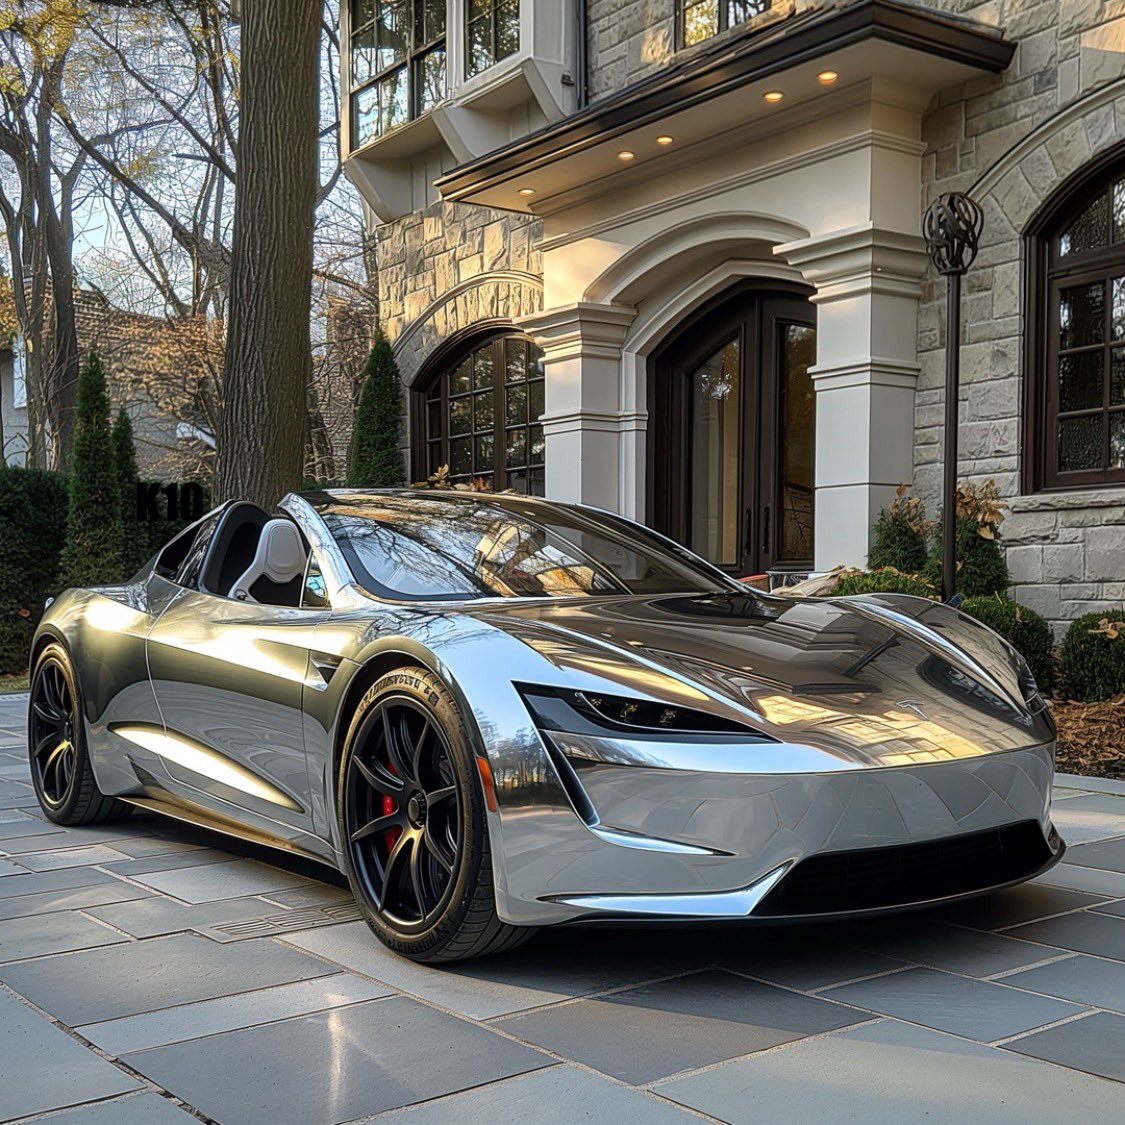 THE NEW TESLA ROADSTER SILVERY.